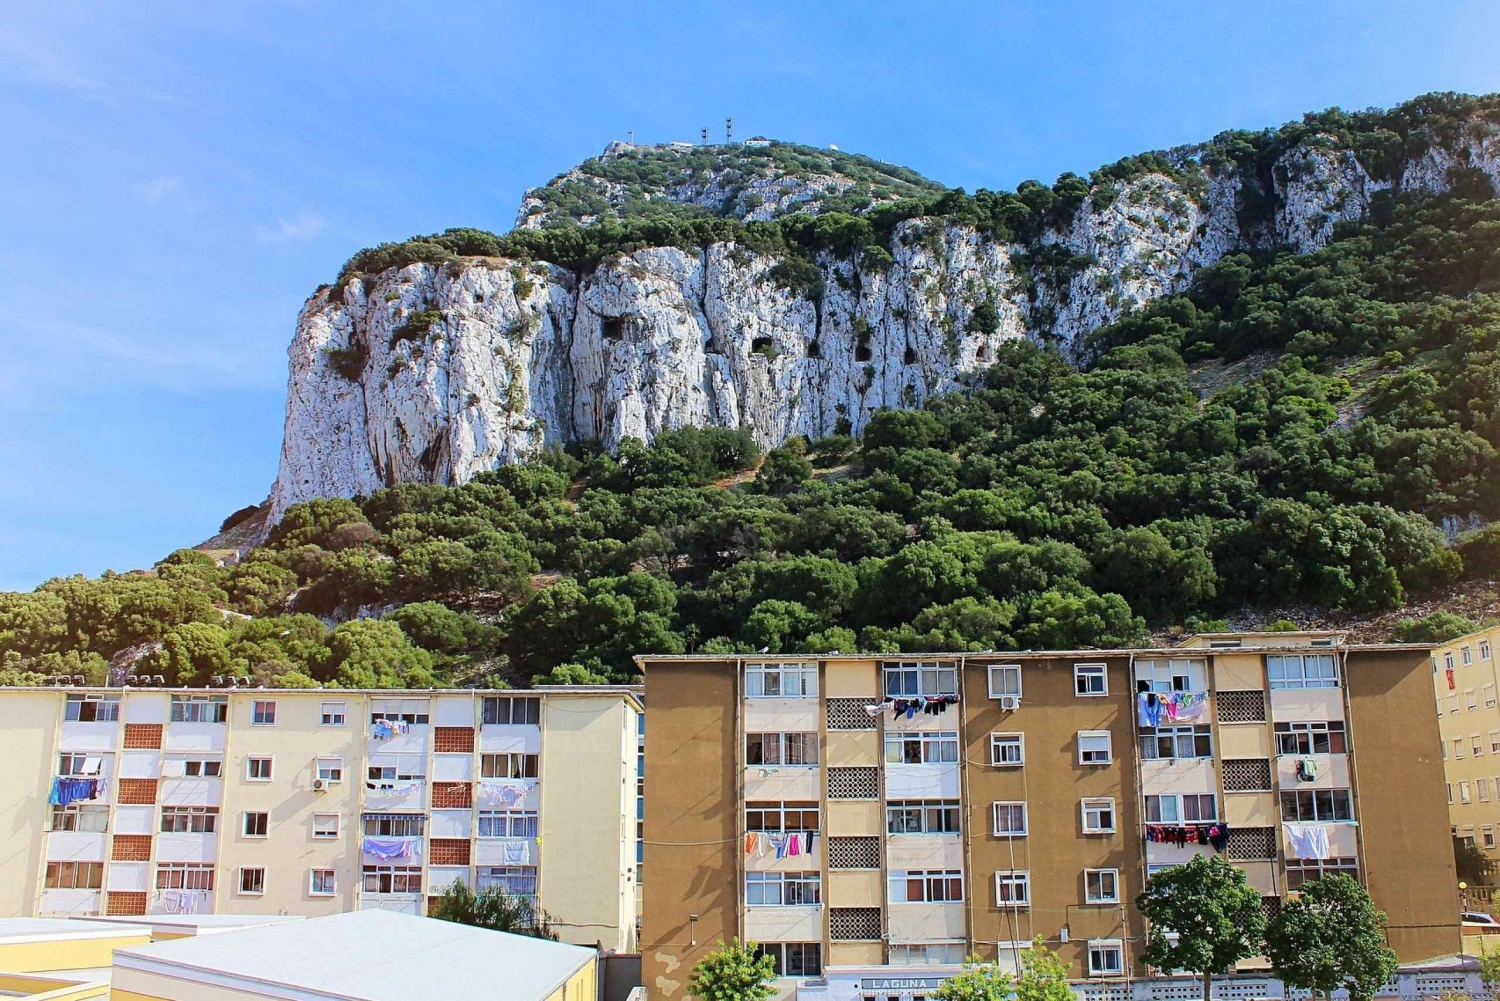 From Costa del Sol: Day Trip to Gibraltar with Guided Tour